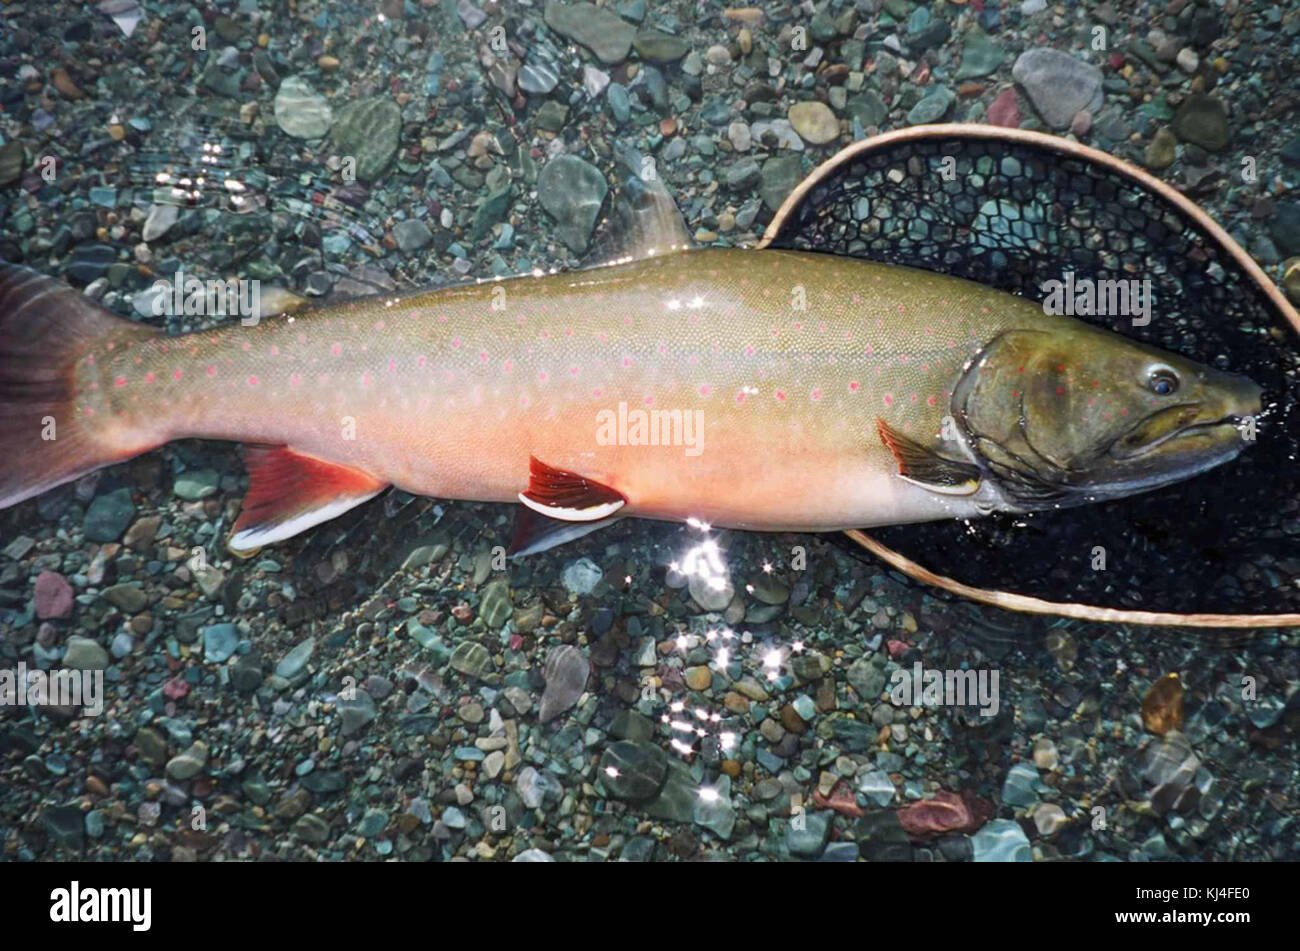 Bull trout fish on rocks by water salvelinus confluentus Stock Photo